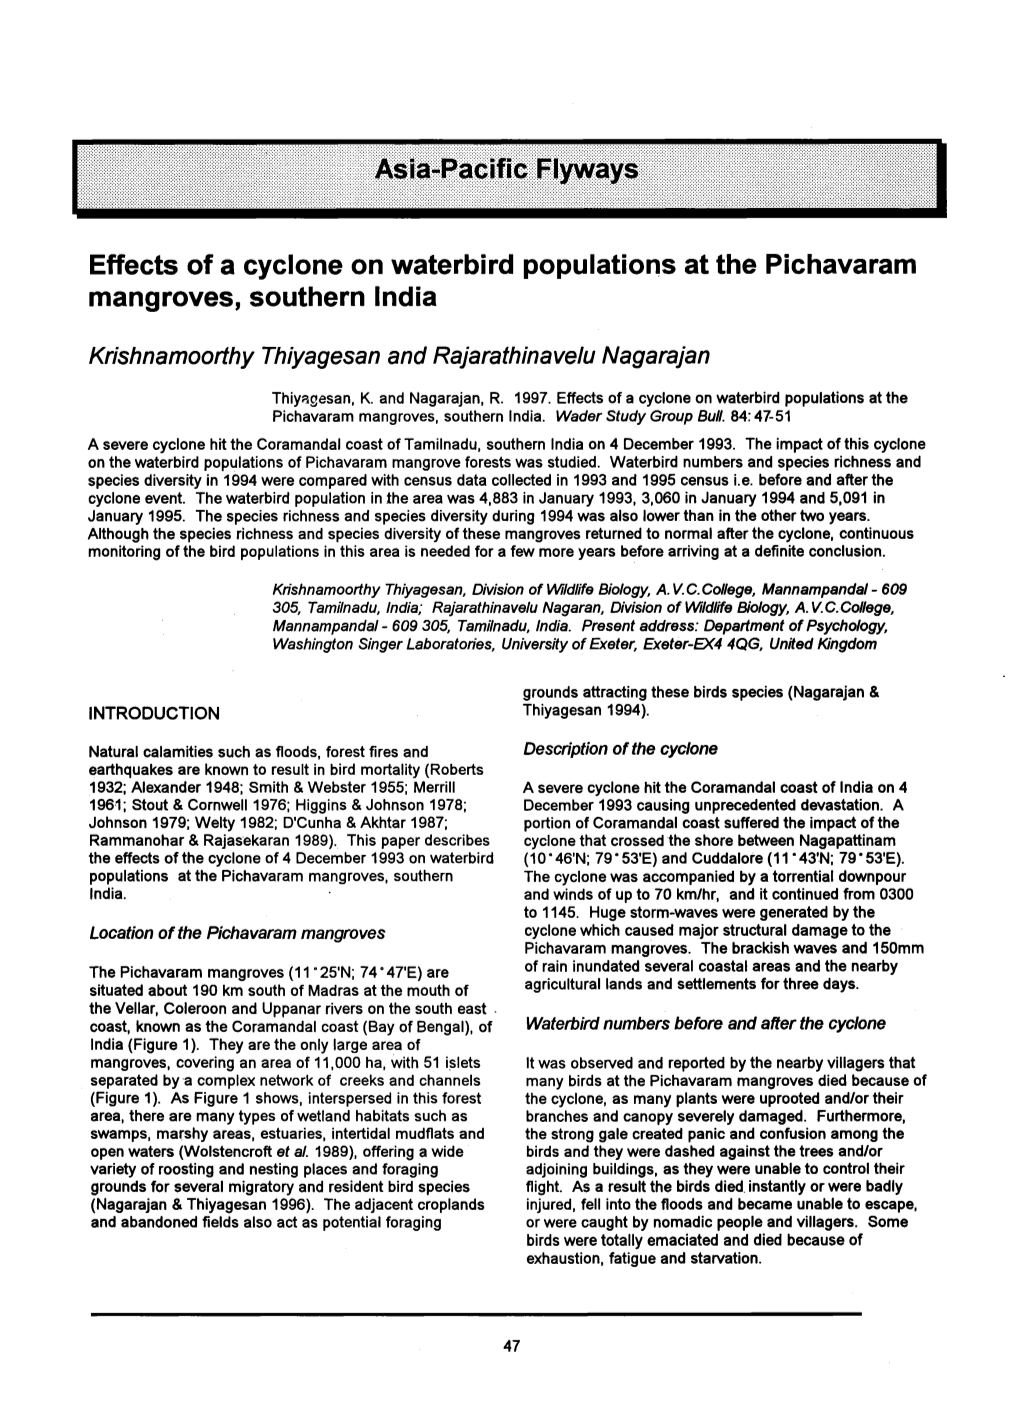 Effects of a Cyclone on Waterbird Populations at the Pichavaram Mangroves, Southern India